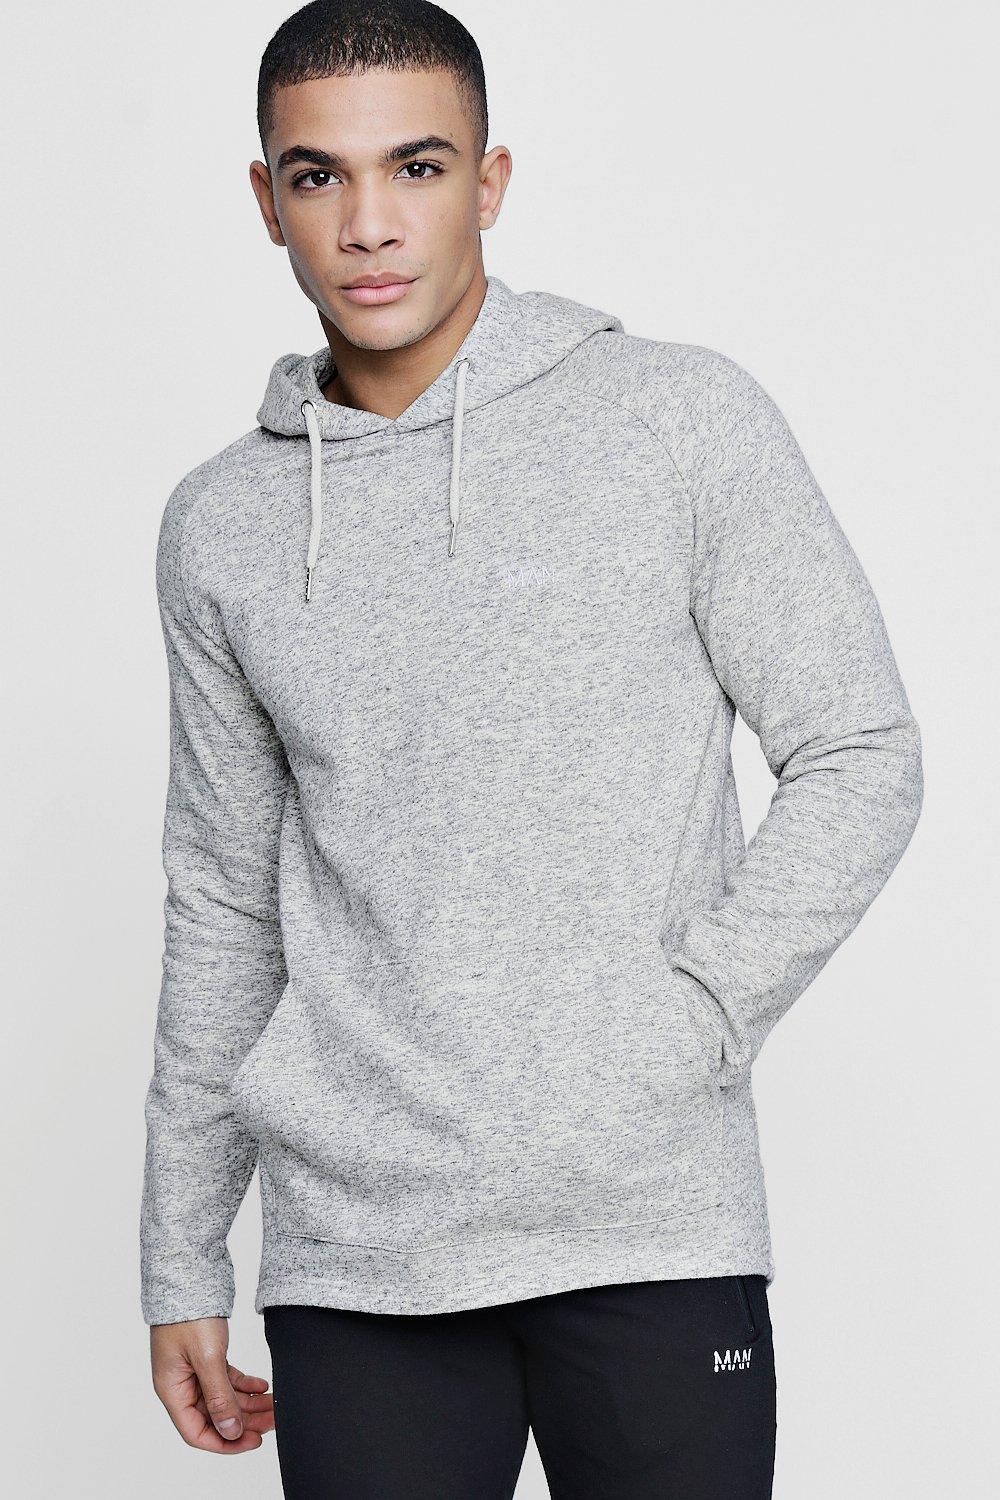 Active Over The Head Gym Hoodie - boohooMAN